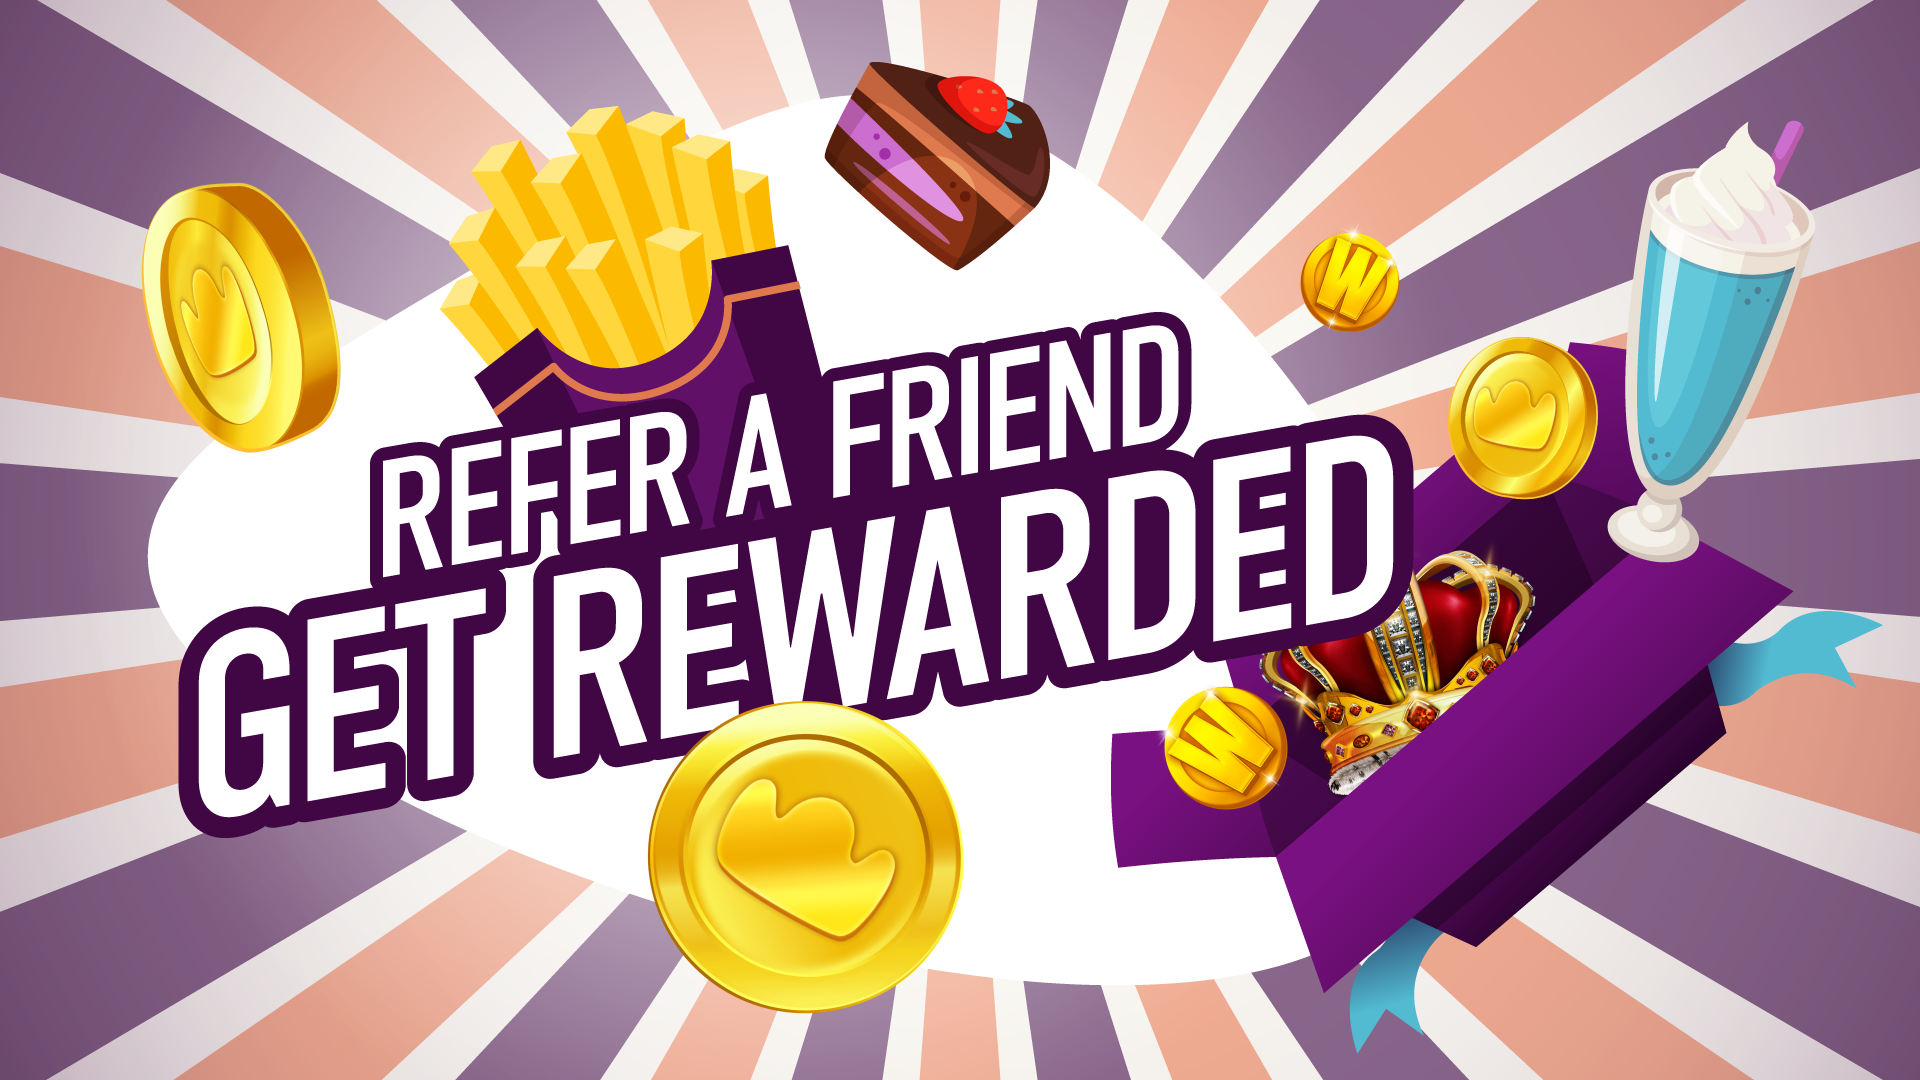 Refer Friends and Get Sweet Casino Rewards! 💰 (Unlimited bonuses!)